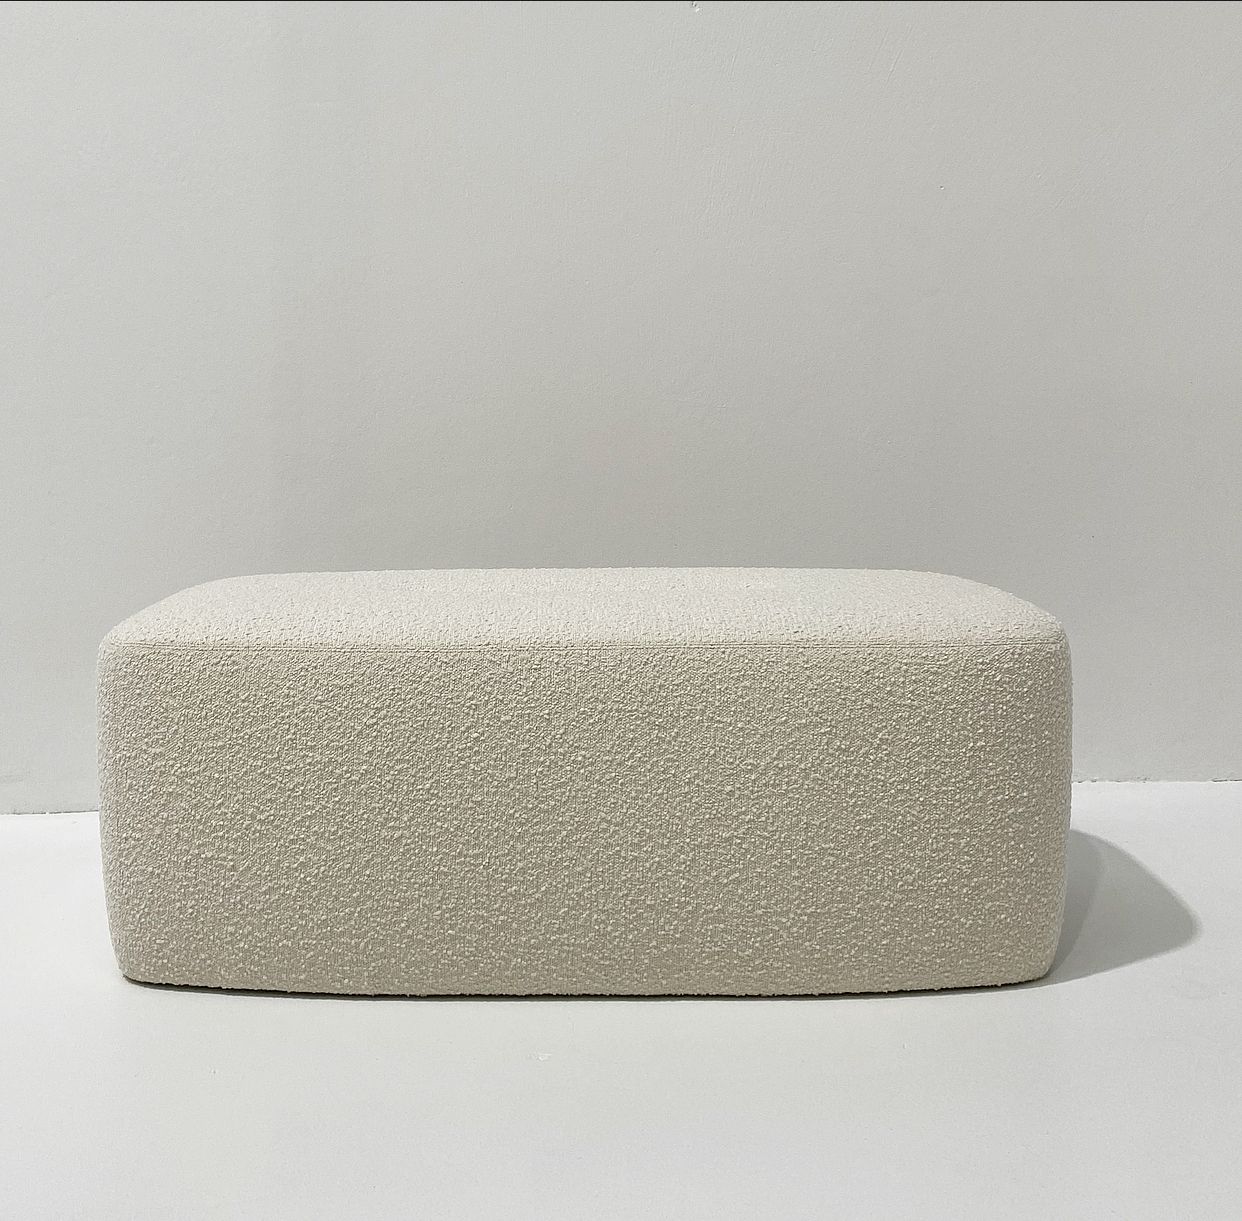 Trendy Boucle Ottomans With Regard To Cream Boucle Ottoman (View 7 of 10)